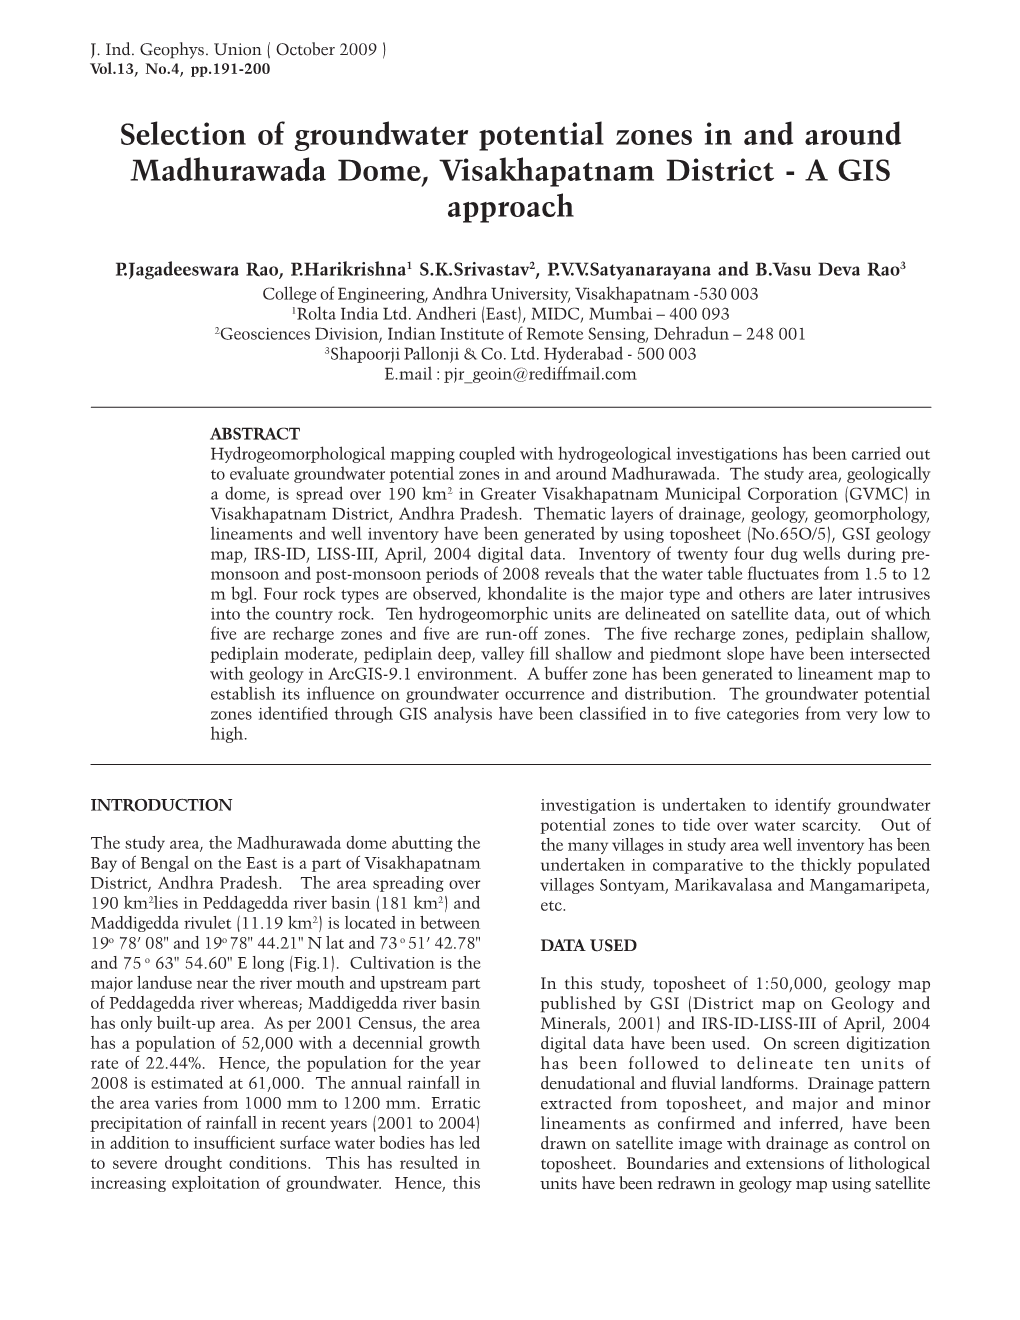 Selection of Groundwater Potential Zones in and Around Madhurawada Dome, Visakhapatnam District - a GIS Approach